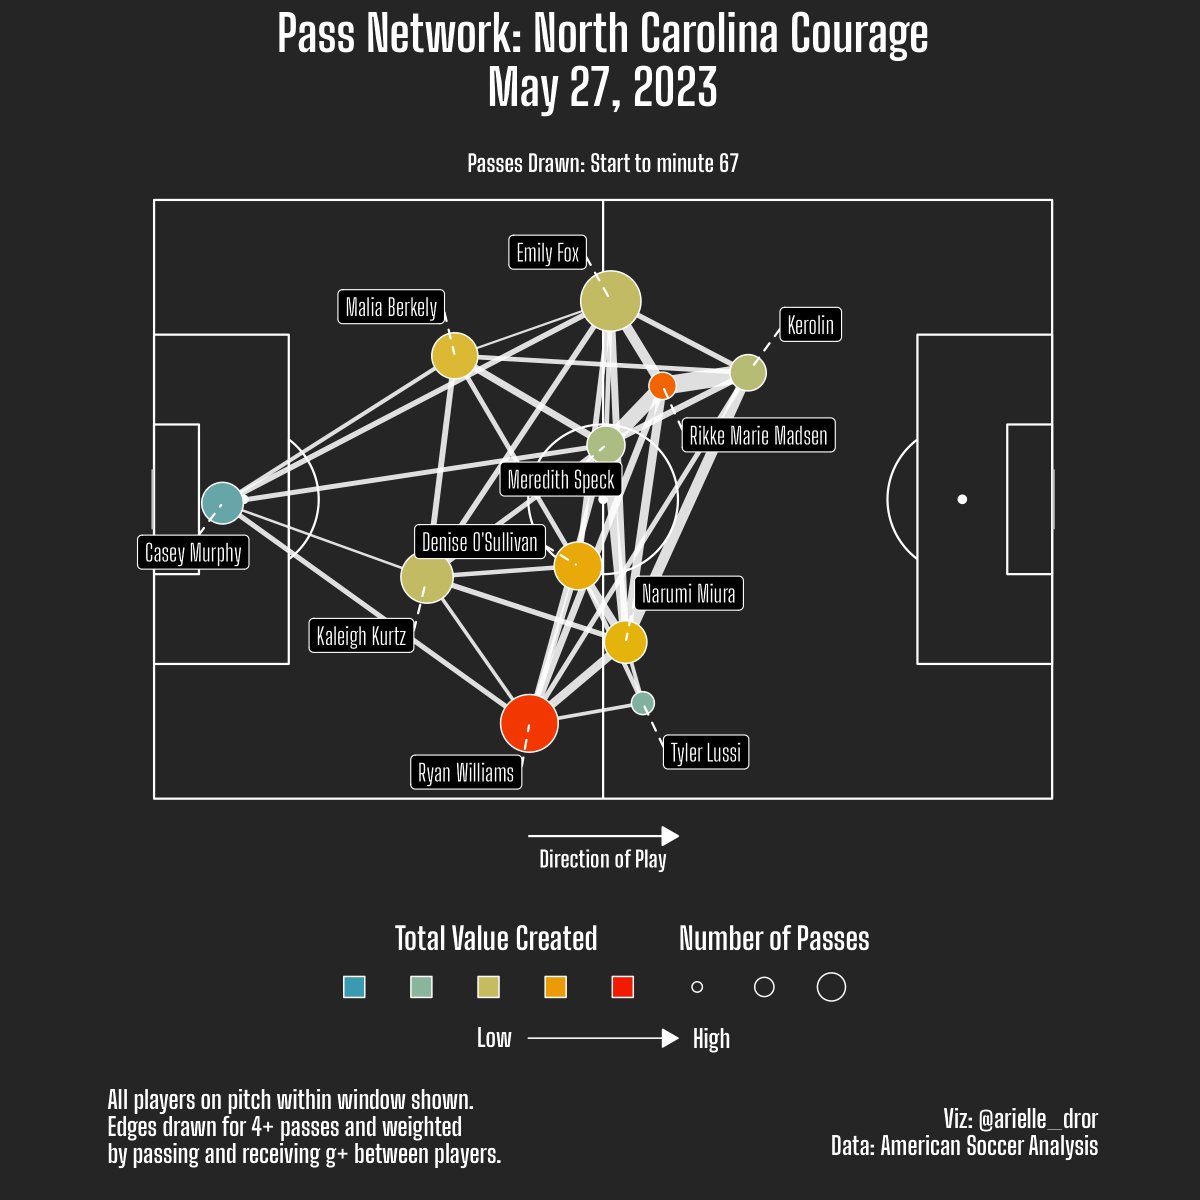 Pass Networks for #RacingLou and #CourageCountry! #NWSL